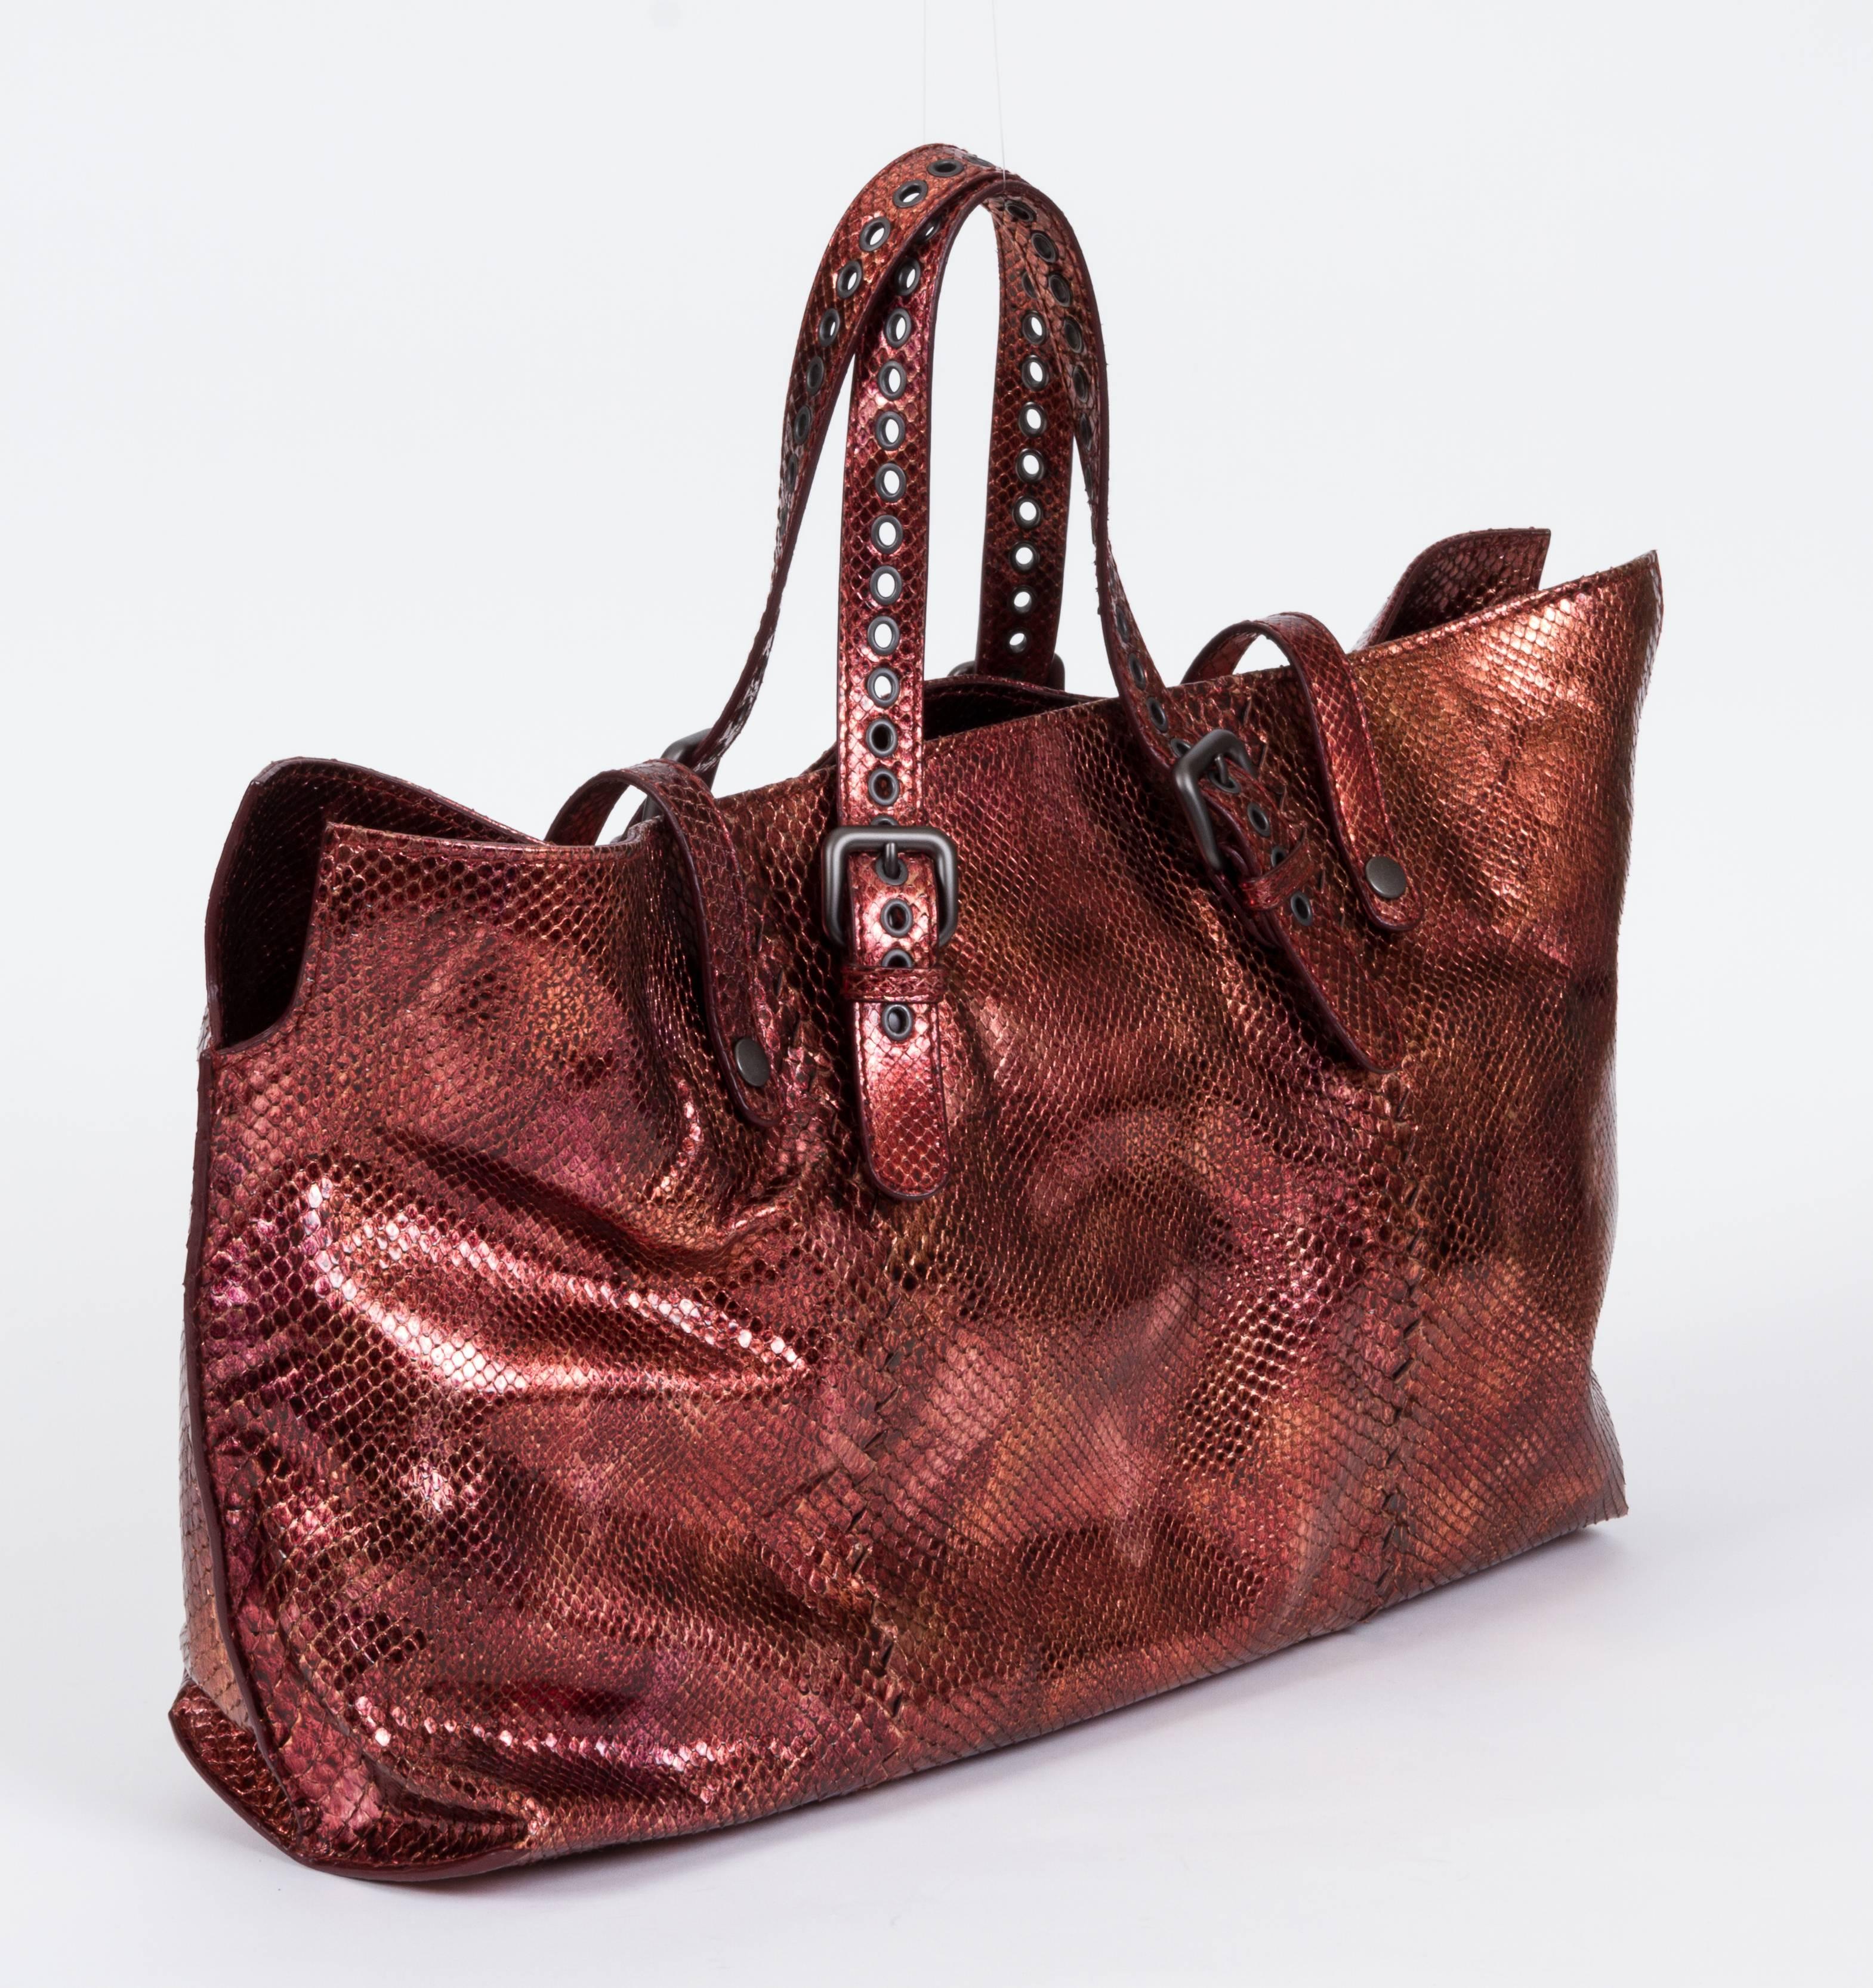 Bottega Veneta authentic metallic rust oversized shopper. Versatile and elegant, comes with two latches and an interior pocket. Size: Length: 18.75